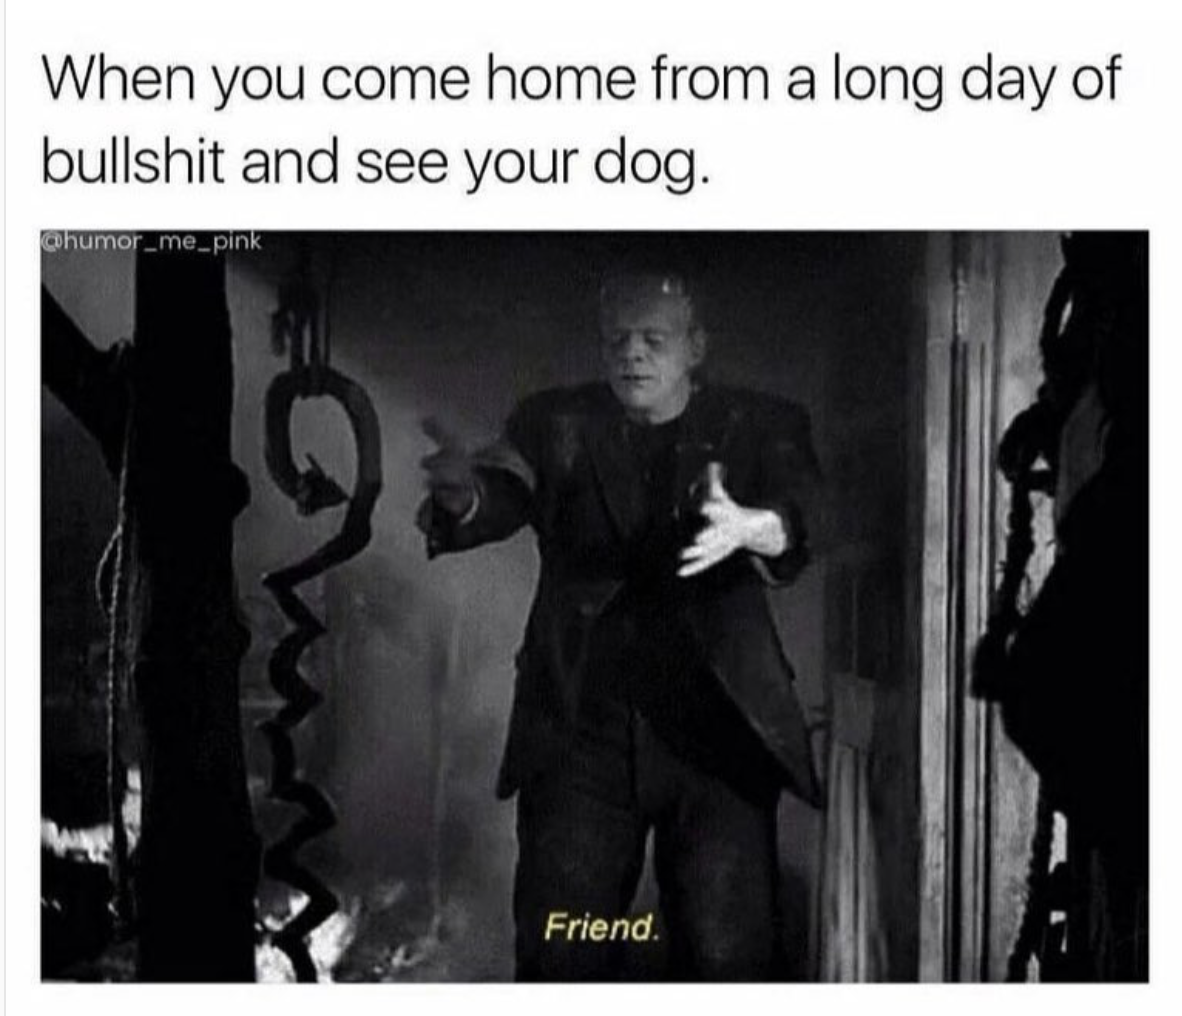 frankenstein memes - When you come home from a long day of bullshit and see your dog. humor me pink Friend.